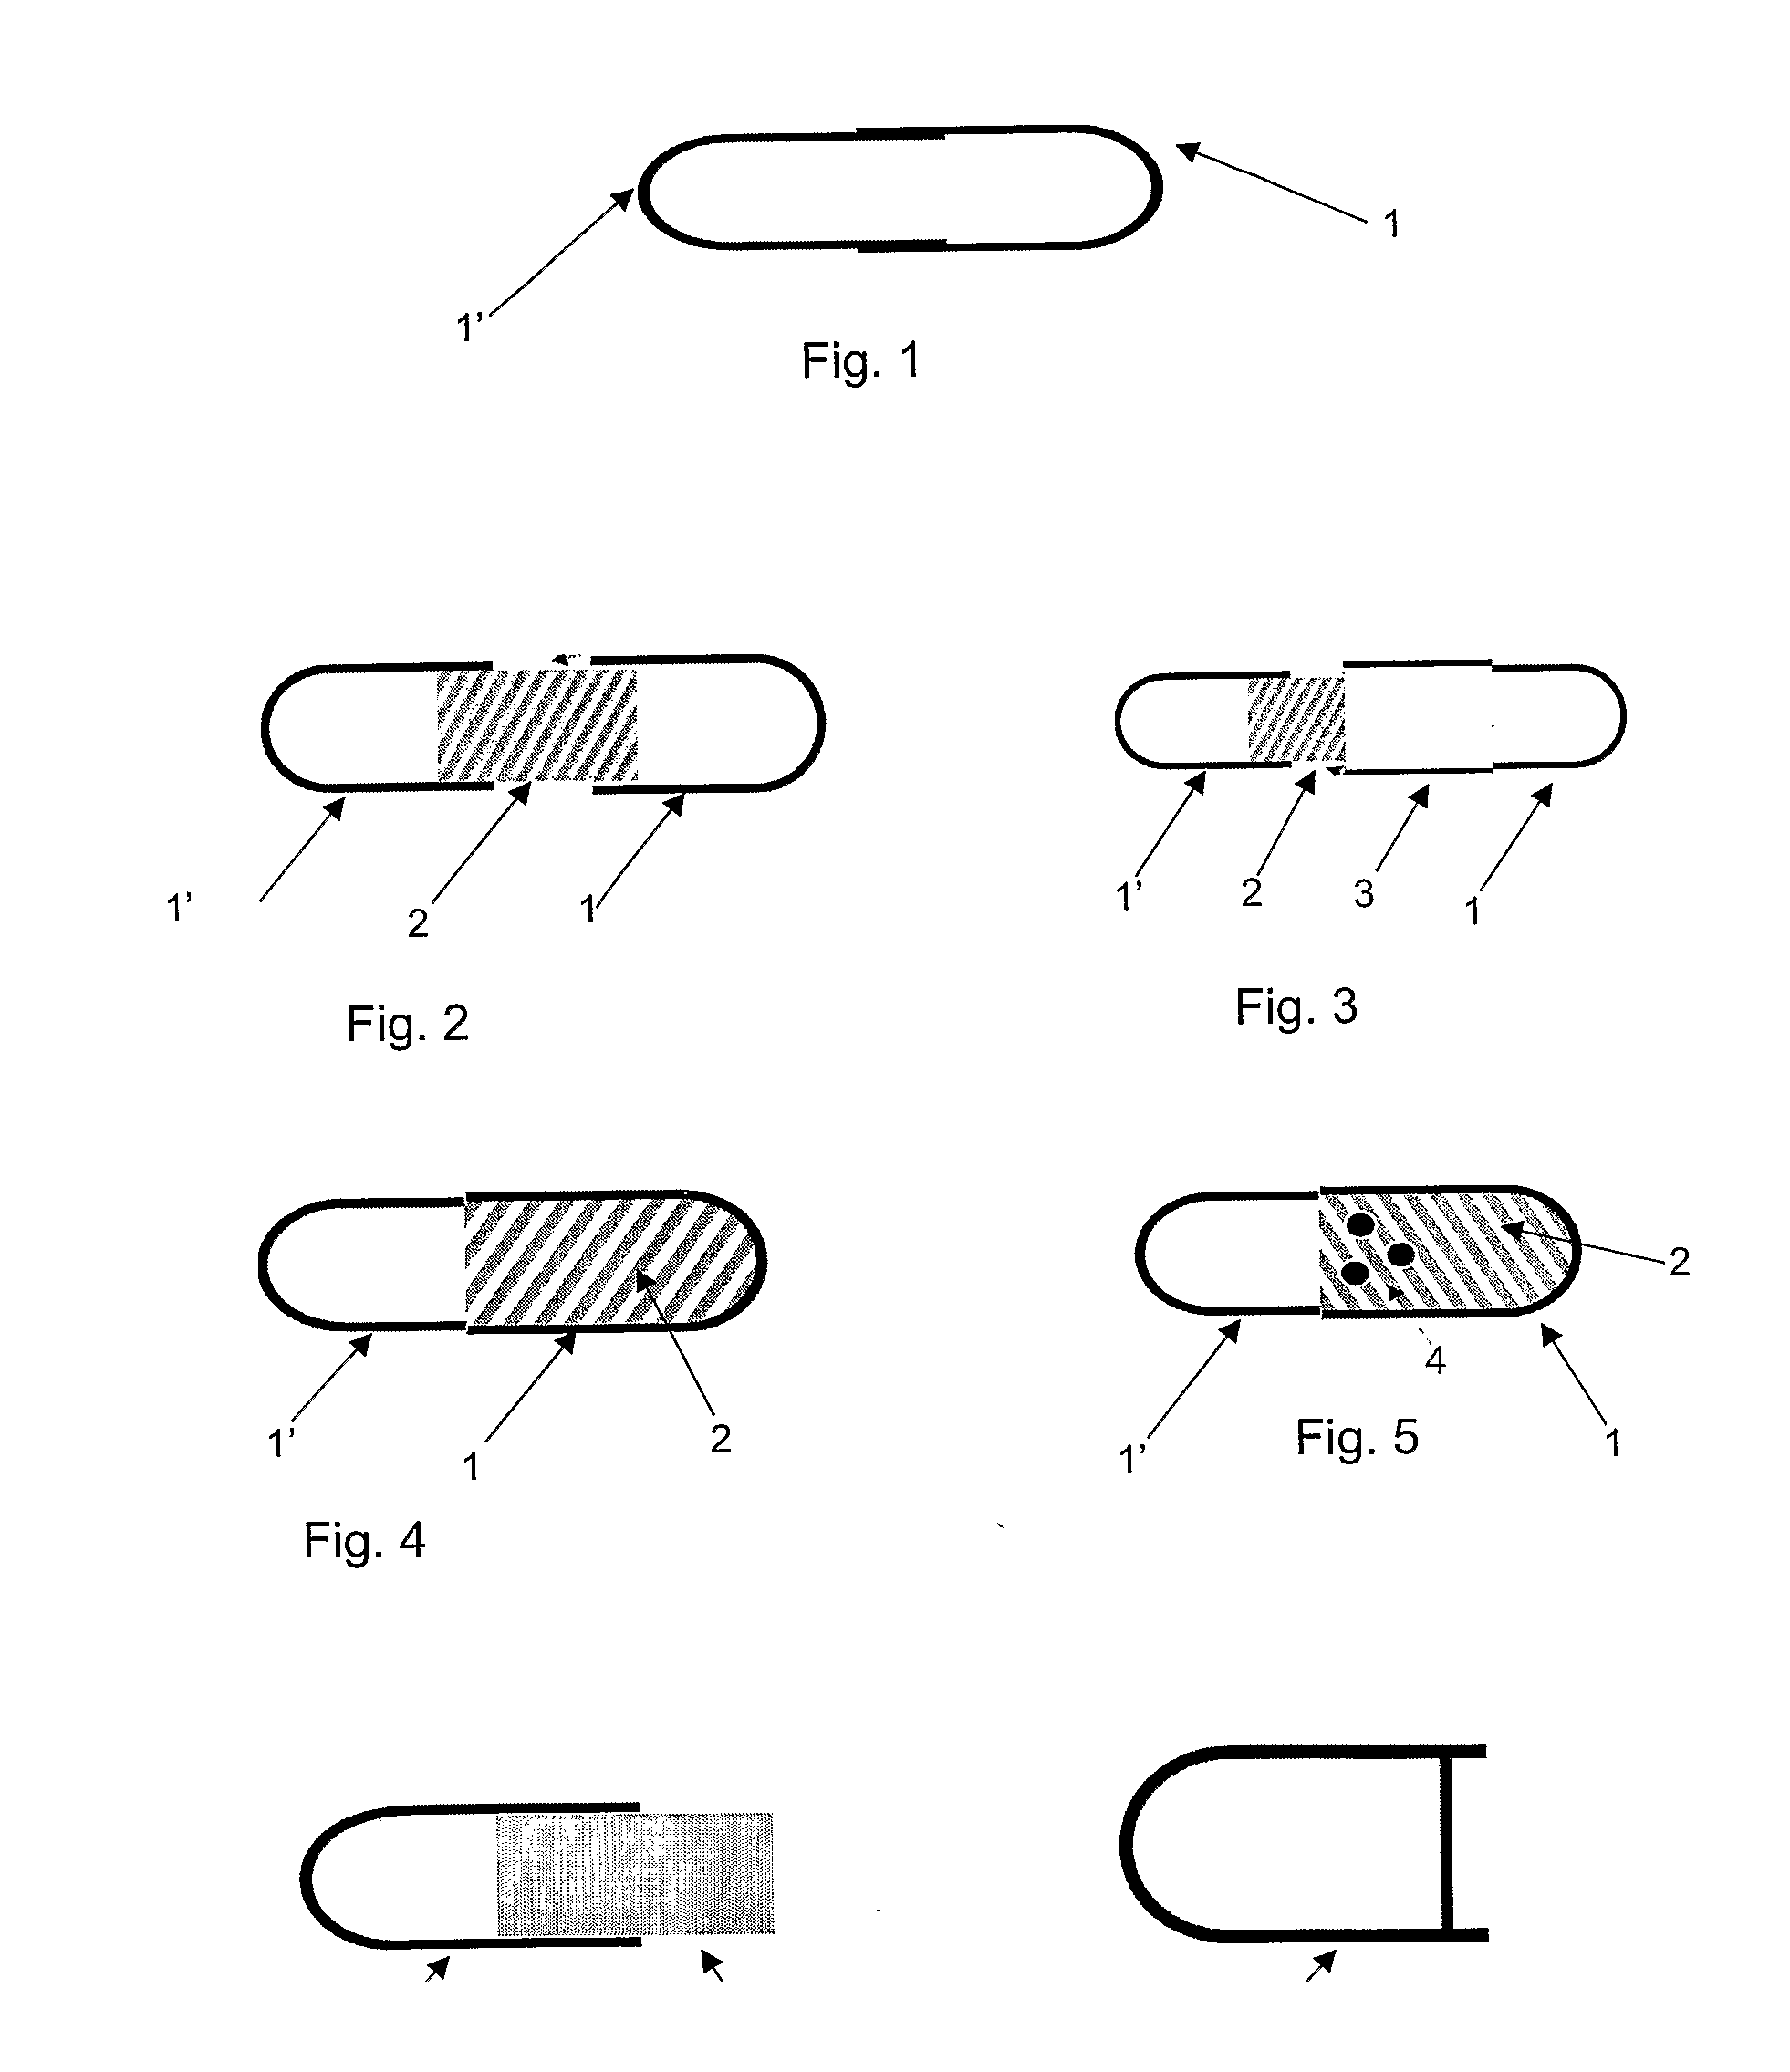 Capsule, method for preparing a capsule, method for packing biological material of a vegetation source in a capsule, culture cultivation methods, and capsule use